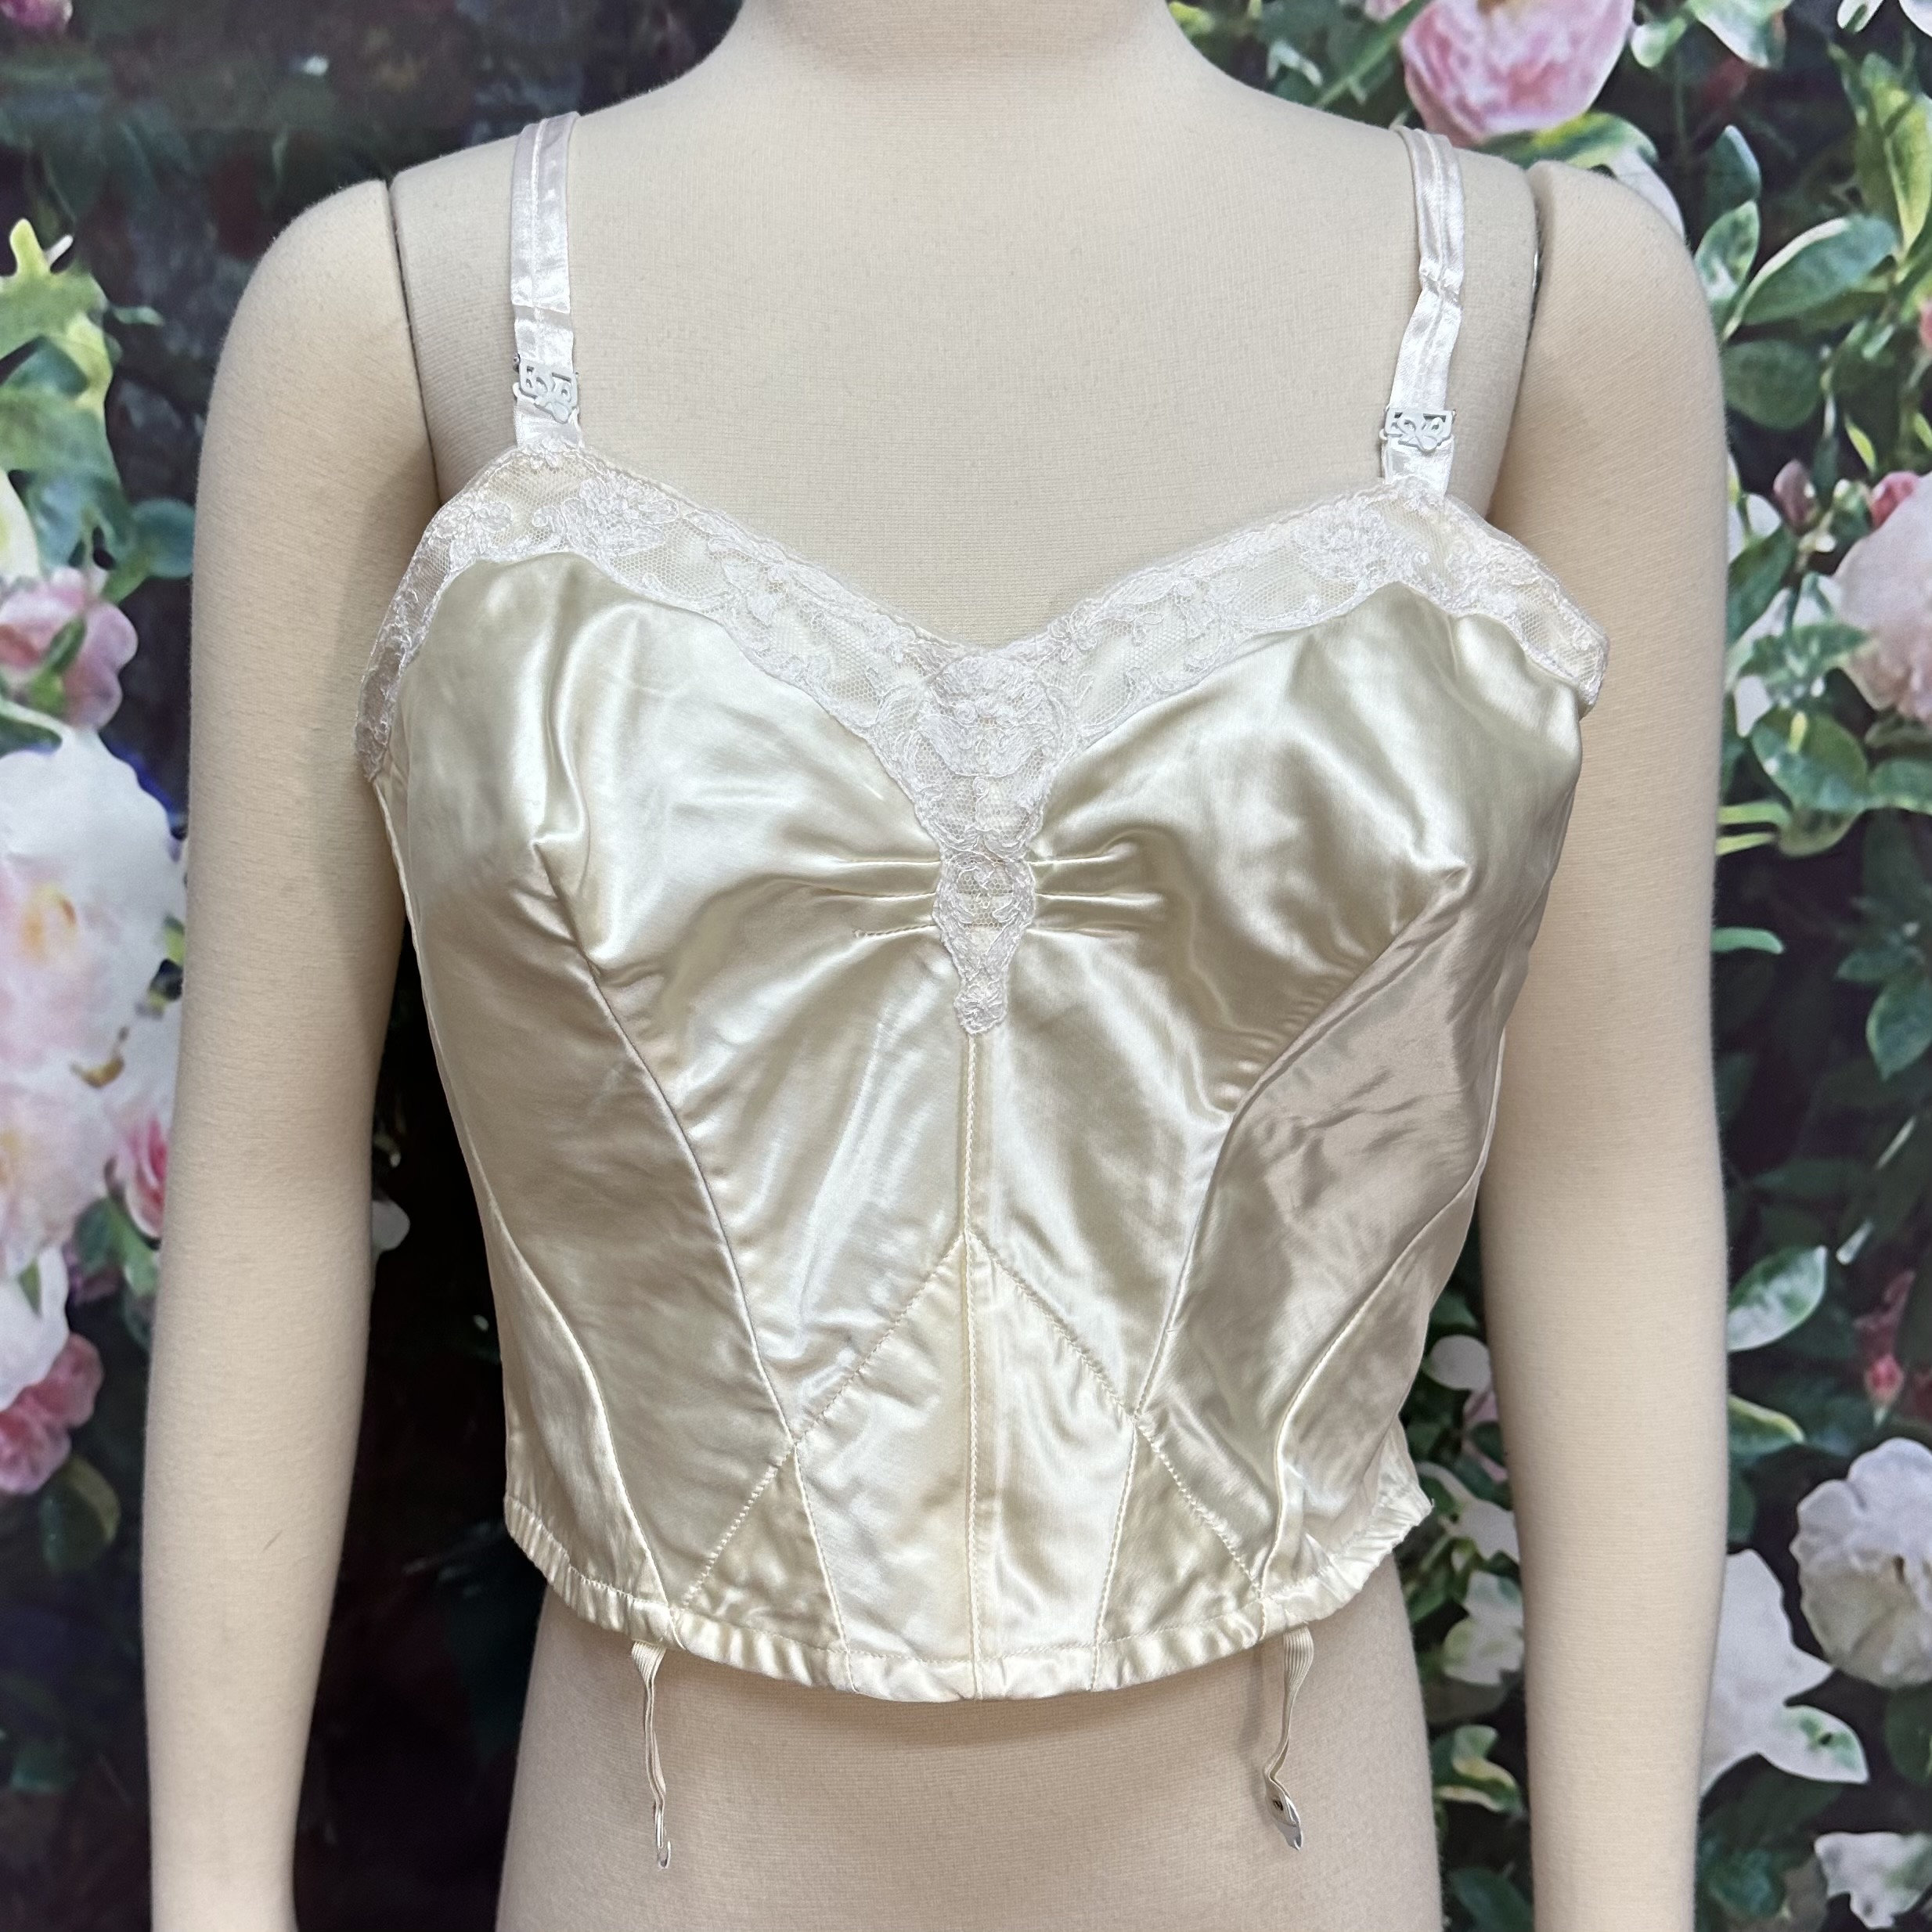 Encircled Bullet Bra Organic 100% Cotton Round Stitch Full Coverage Winsome  Bra Vintage Pointy Bra With Center Elastic Rose 